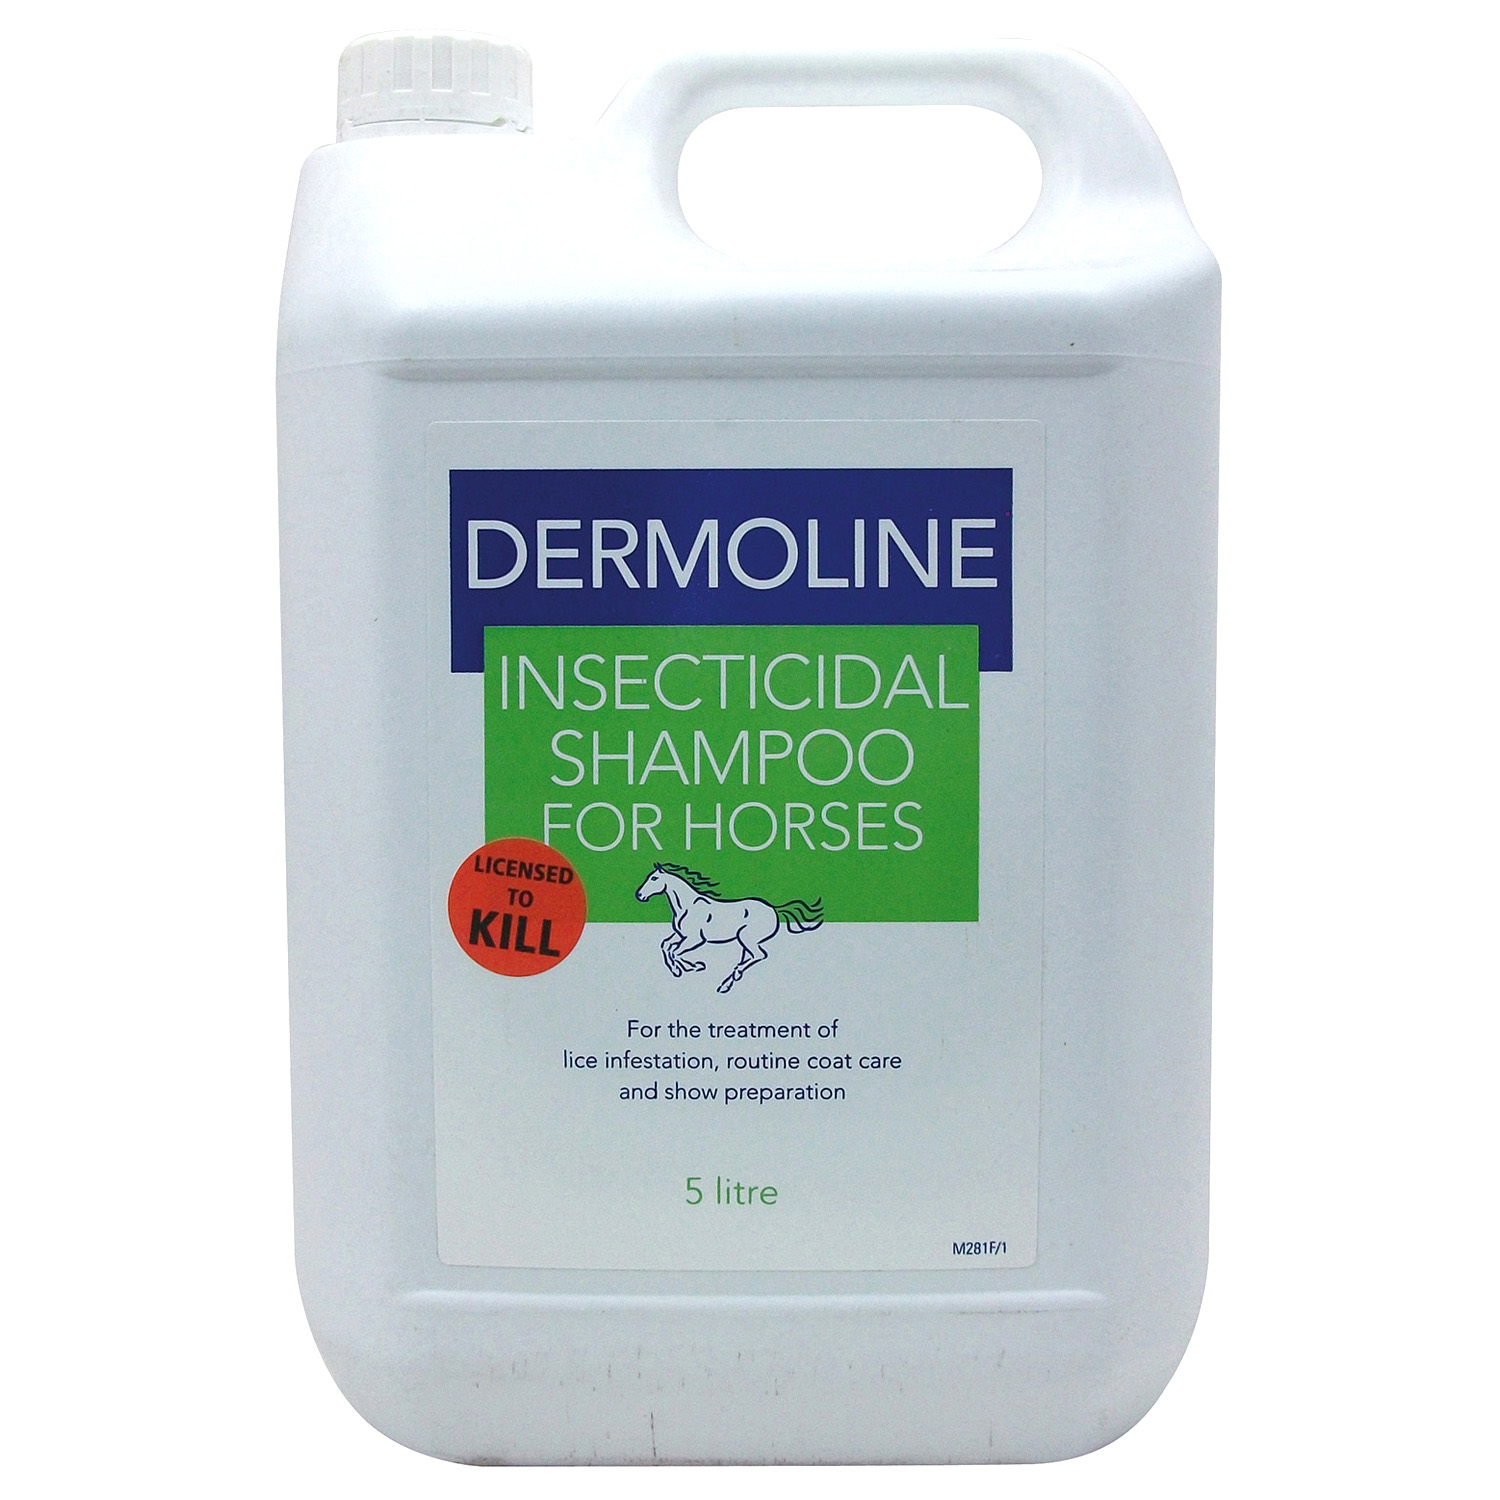 DERMOLINE INSECT SHAMPOO FOR HORSES DERMOLINE INSECT SHAMPOO FOR HORSES 5 LT  5 LT